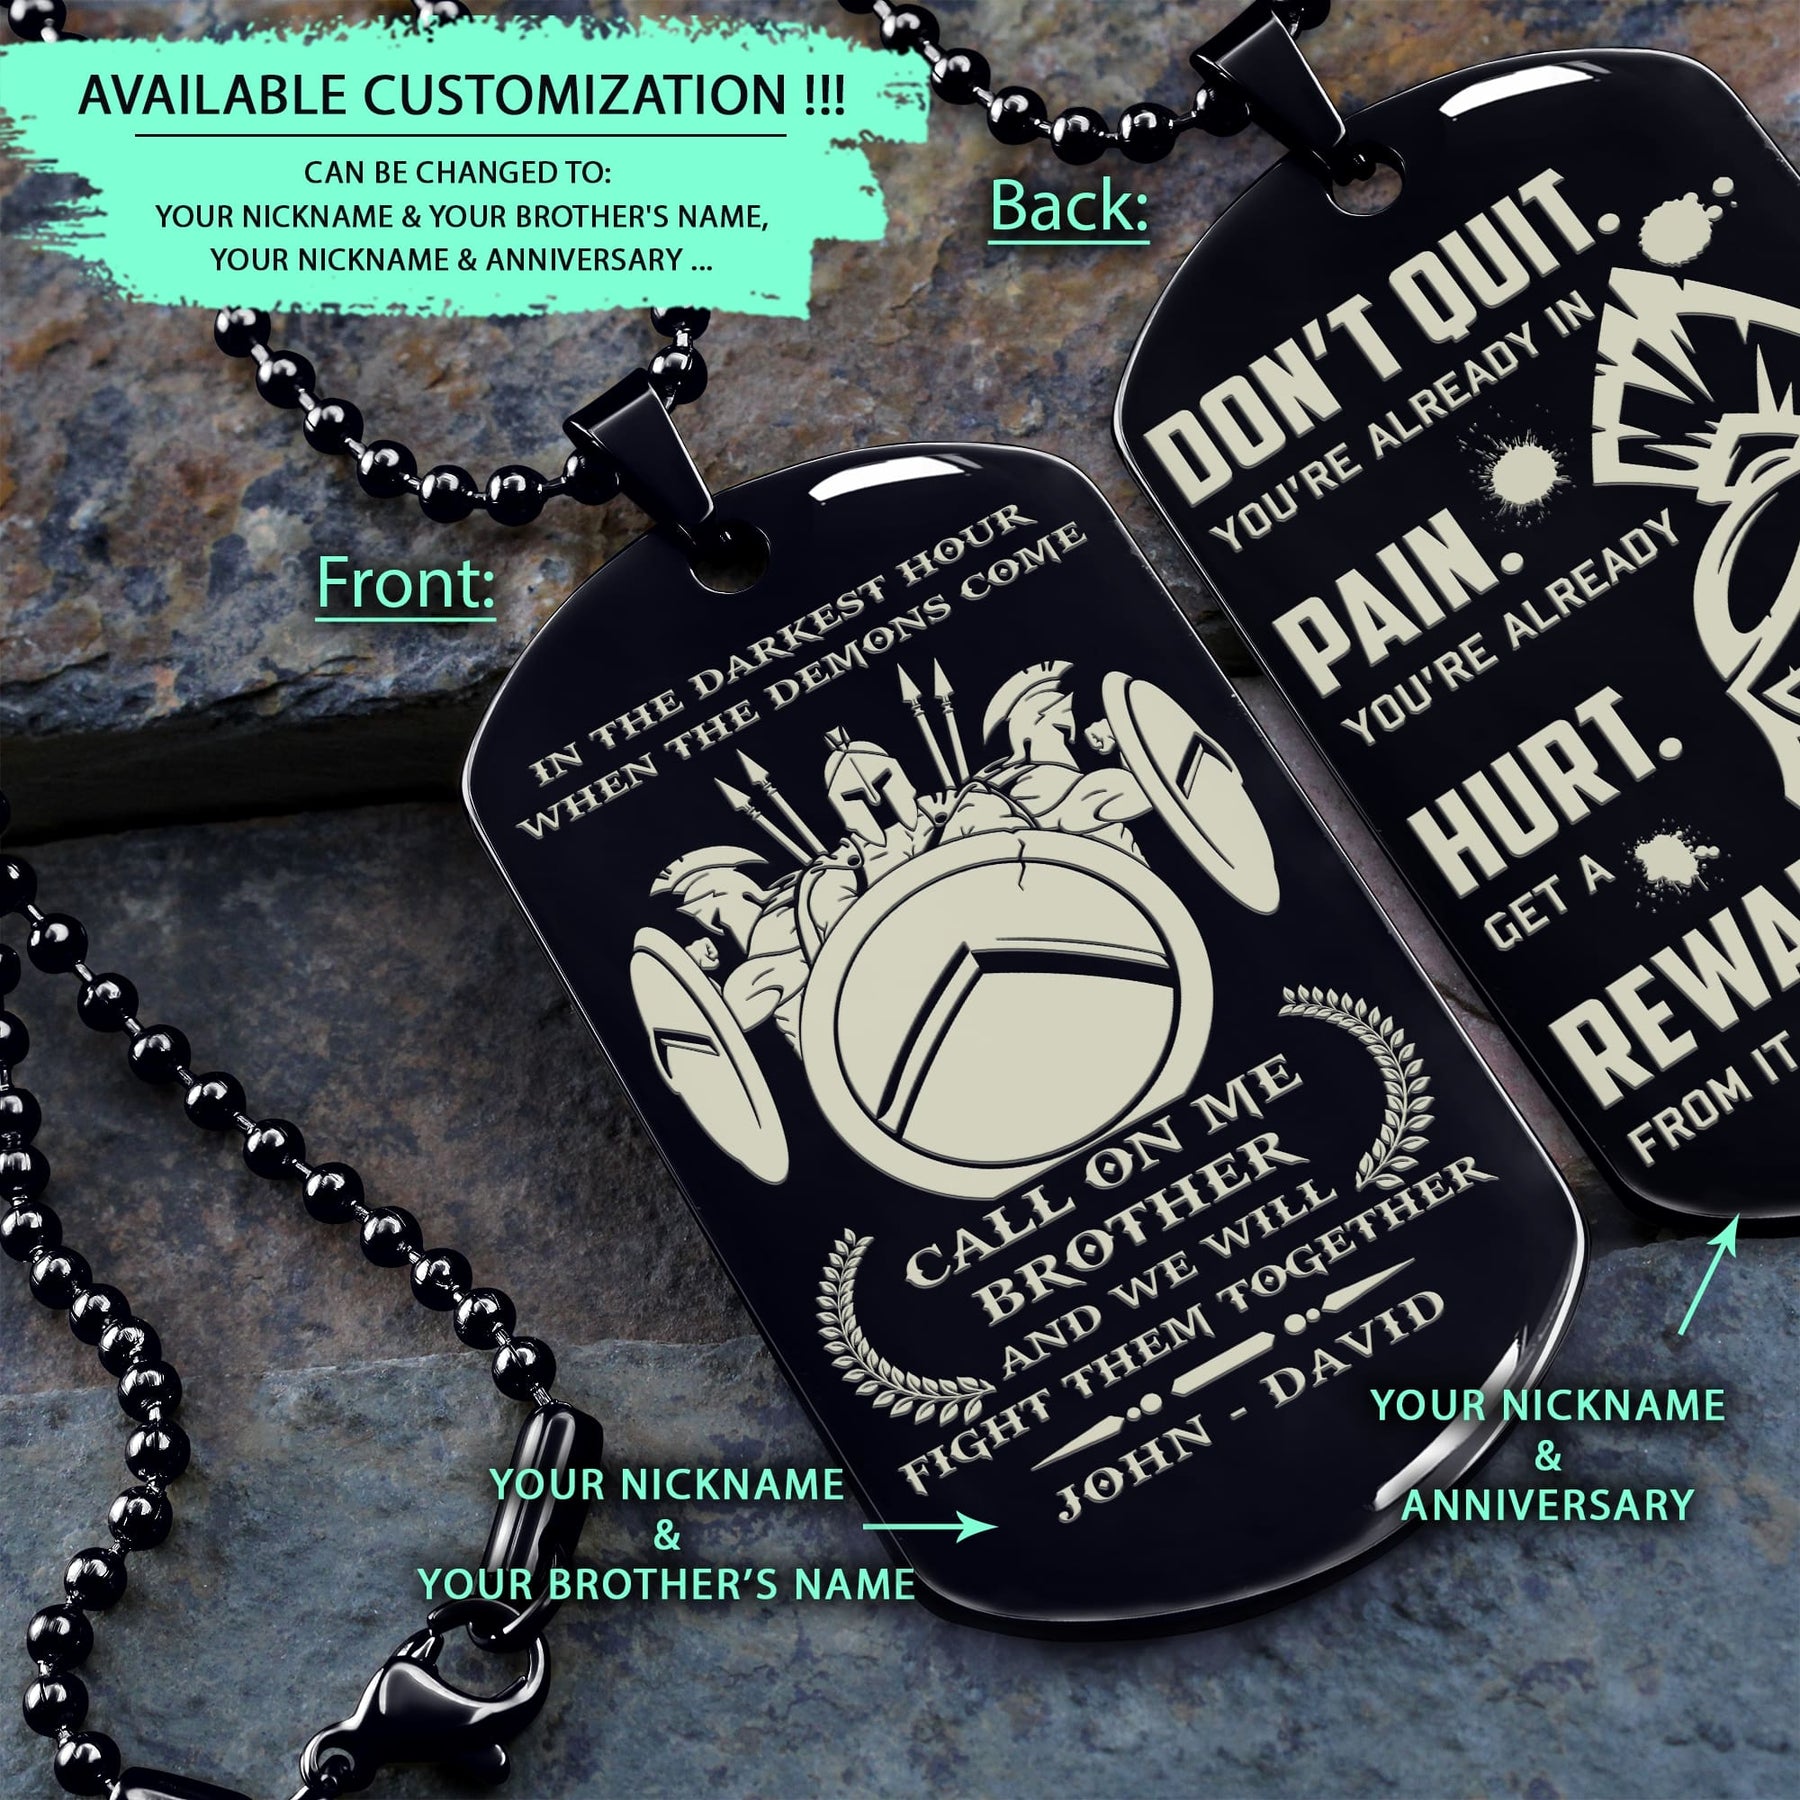 WAD051 - Call On Me Brother - Don't Quit - Spartan - Warrior - Engrave Double Black Dog Tag